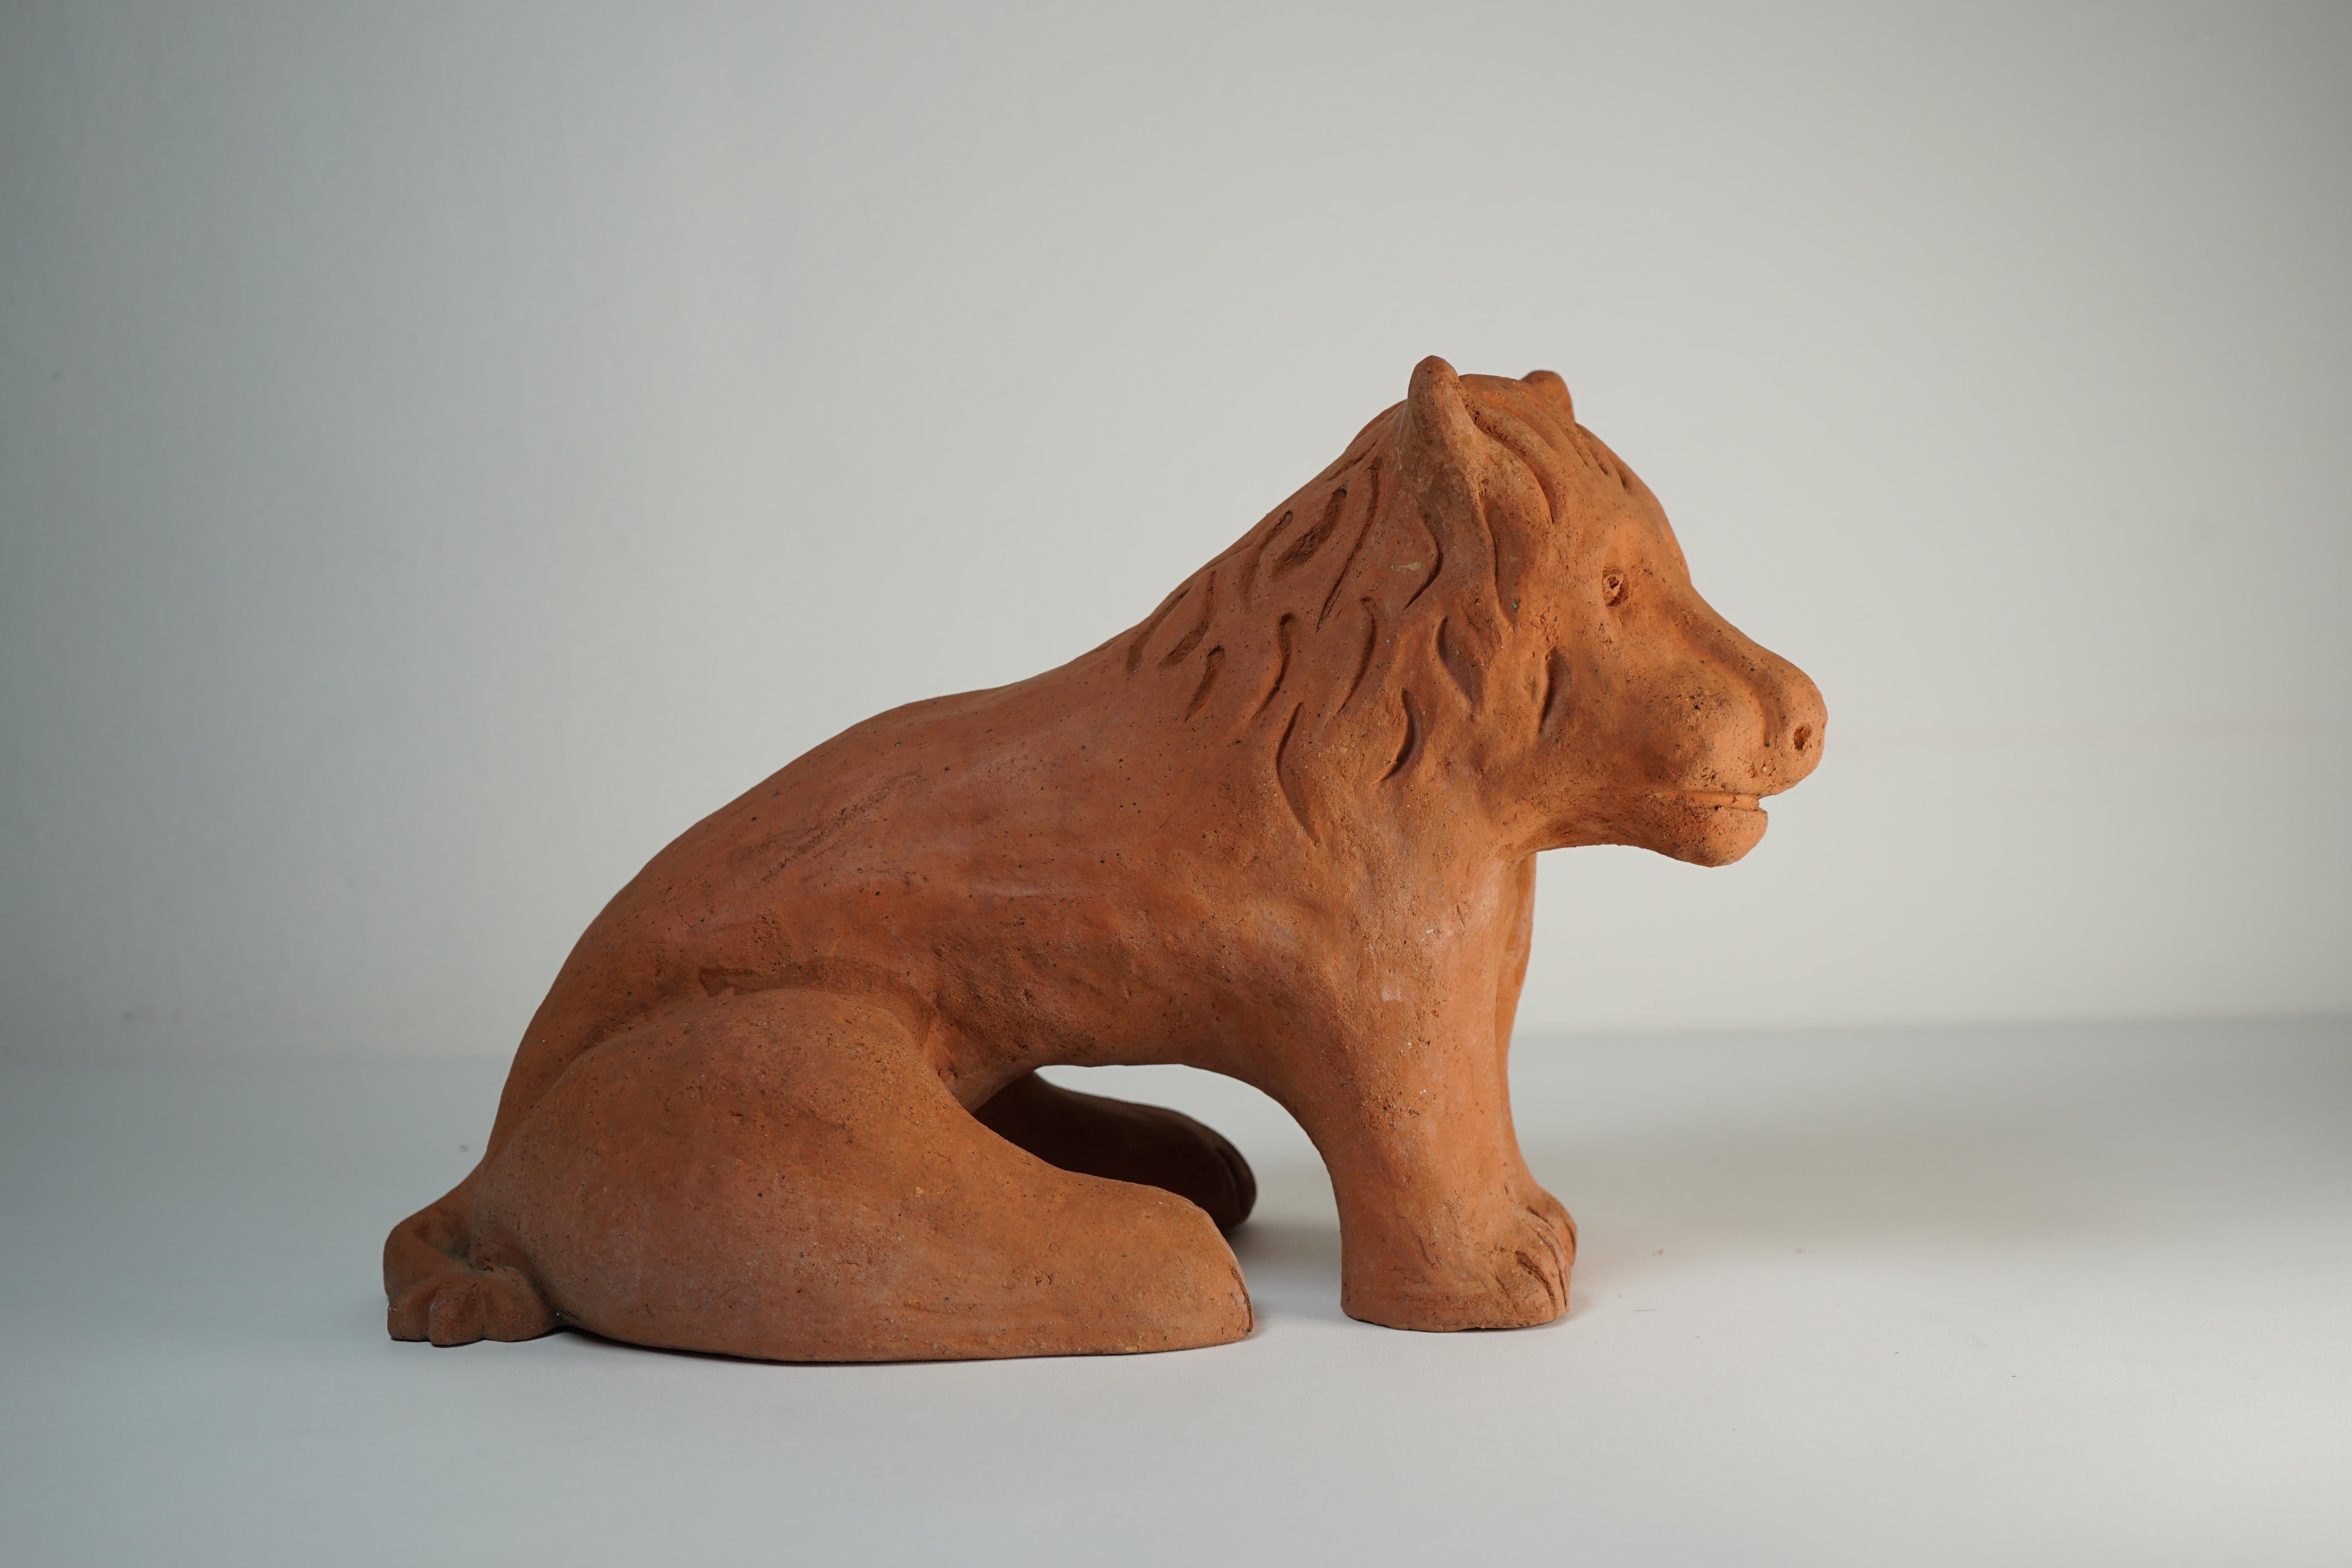 Ceramic sculpture Lion model designed by Nathalie Du Pasquier and produced by Alessio Sarri in 1993. Engraved in the pottery , signature of the artist and manufacturer .
The fox is part of a series of sculptures made up of 7 different